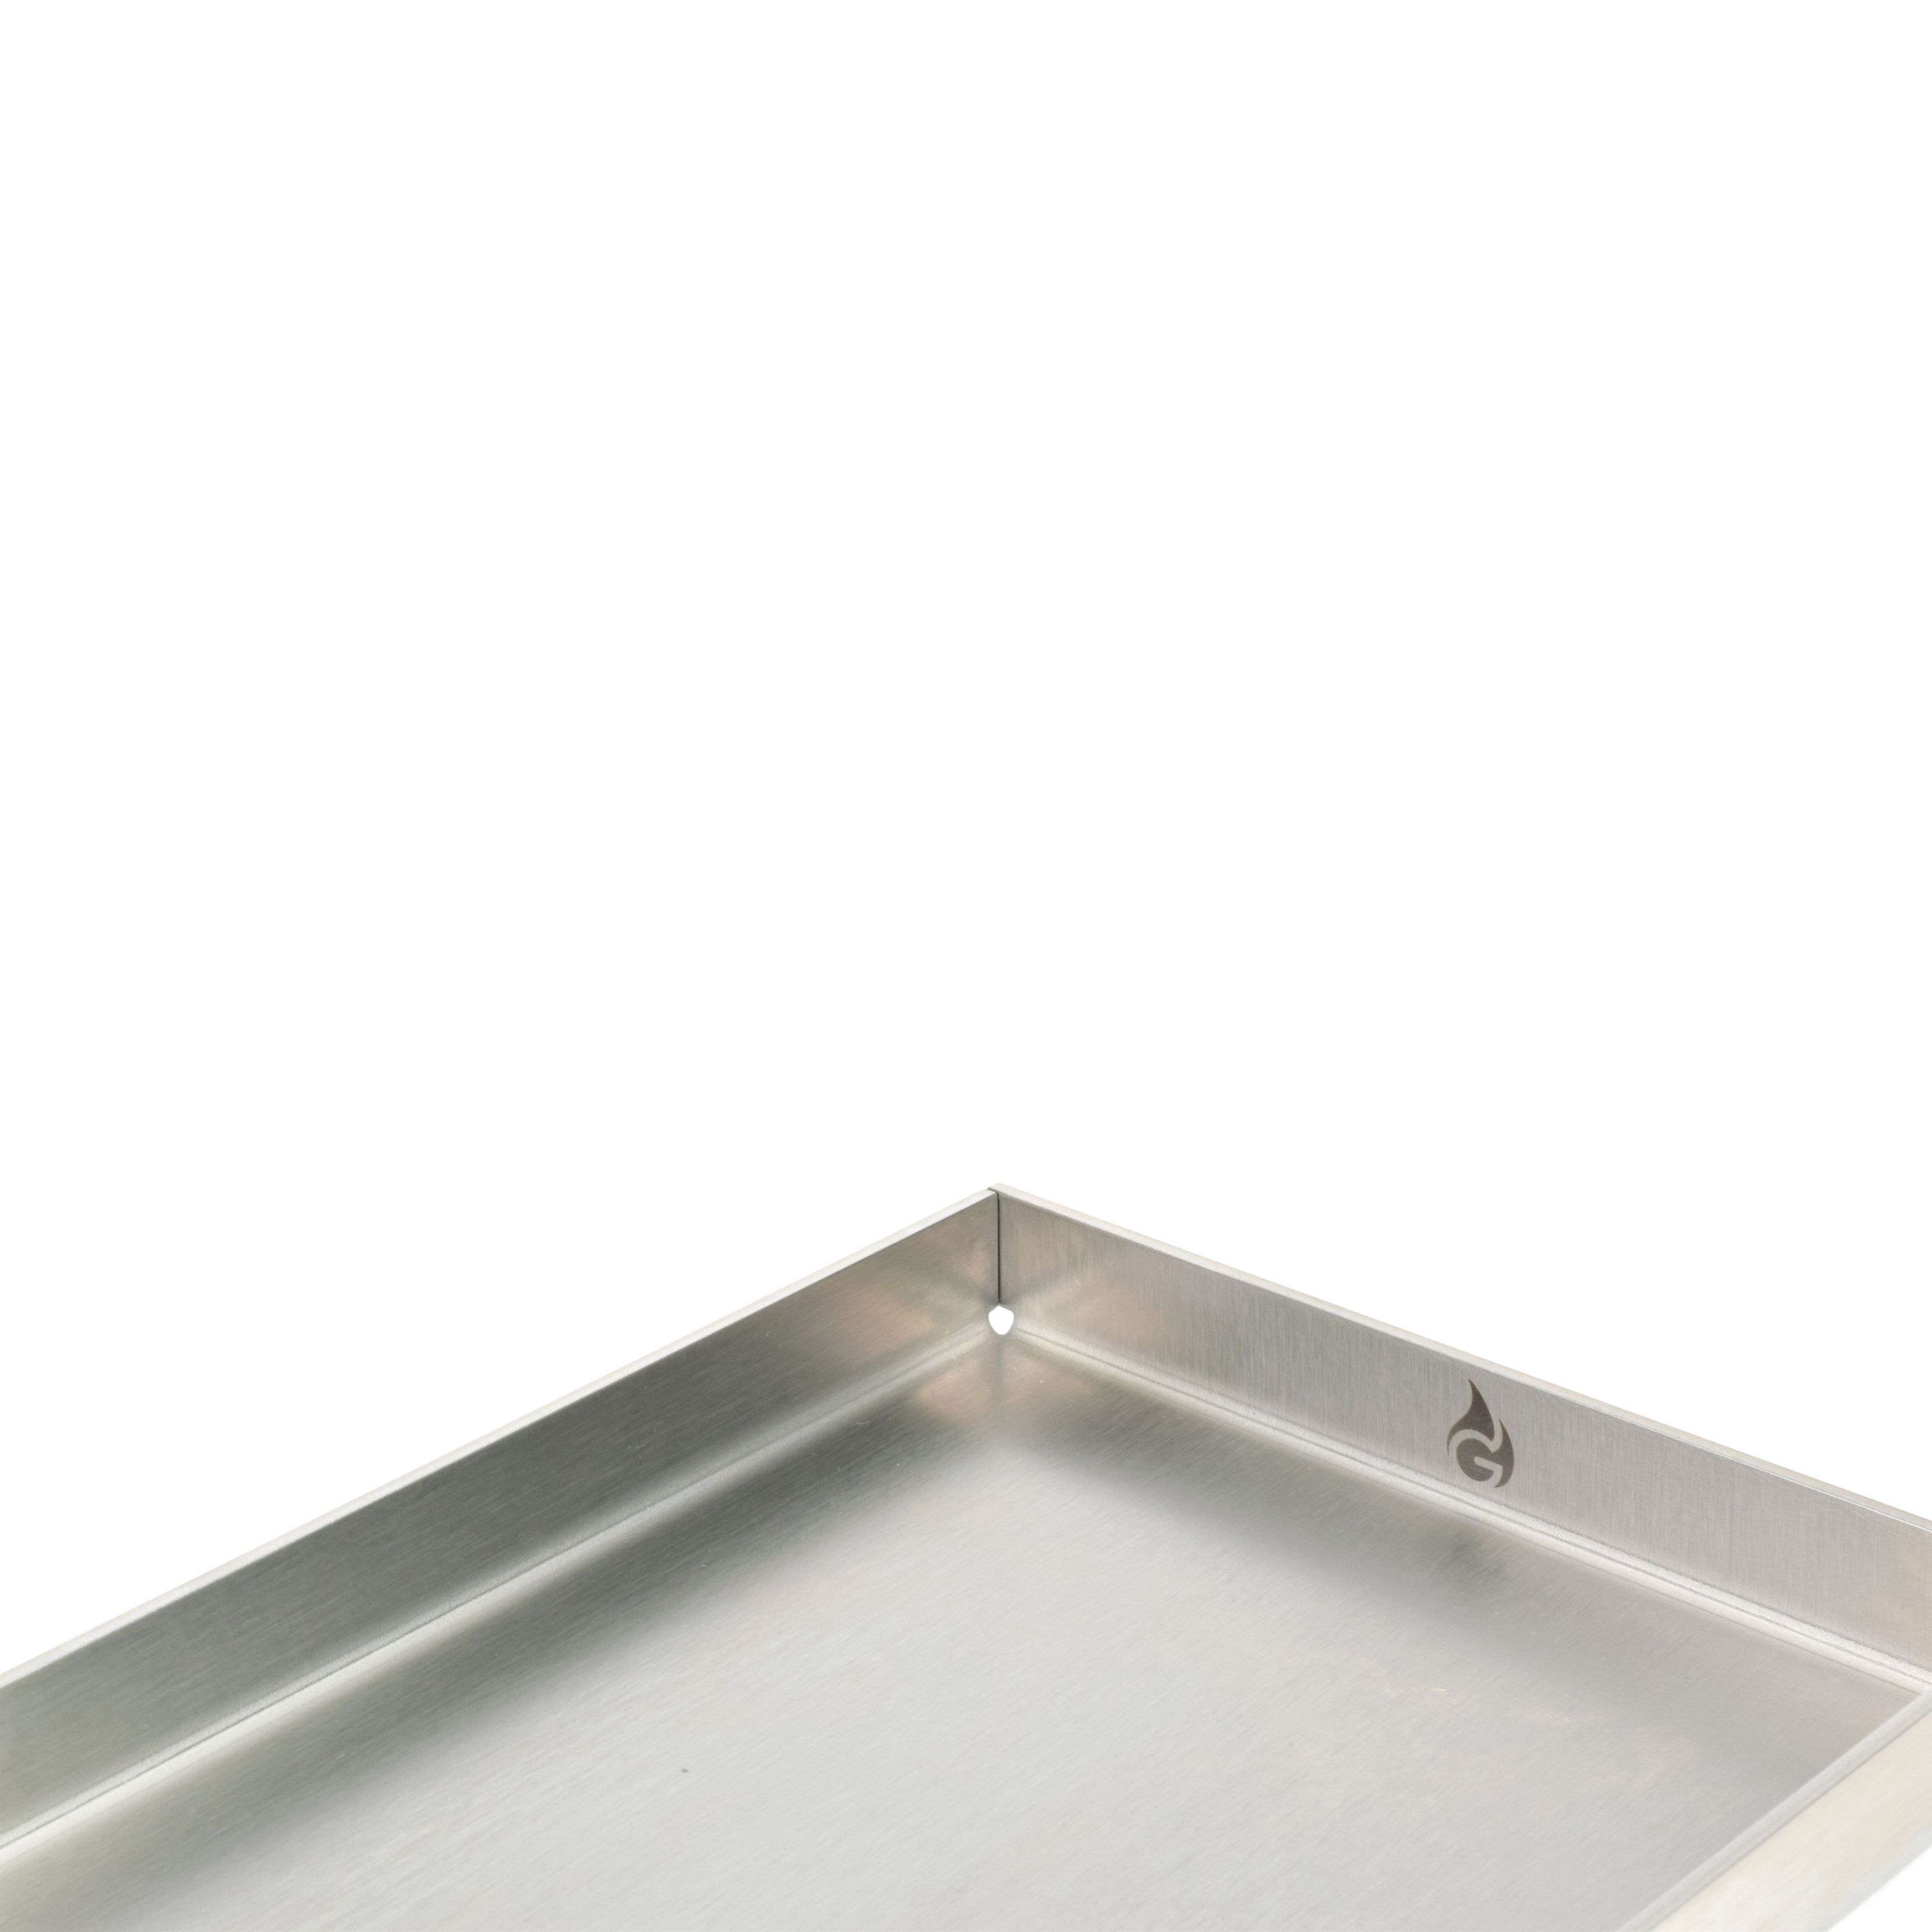 Stainless steel grill plate - Plancha 44,3x 26 for Weber Spirit 200 and 300 series (from 2013)